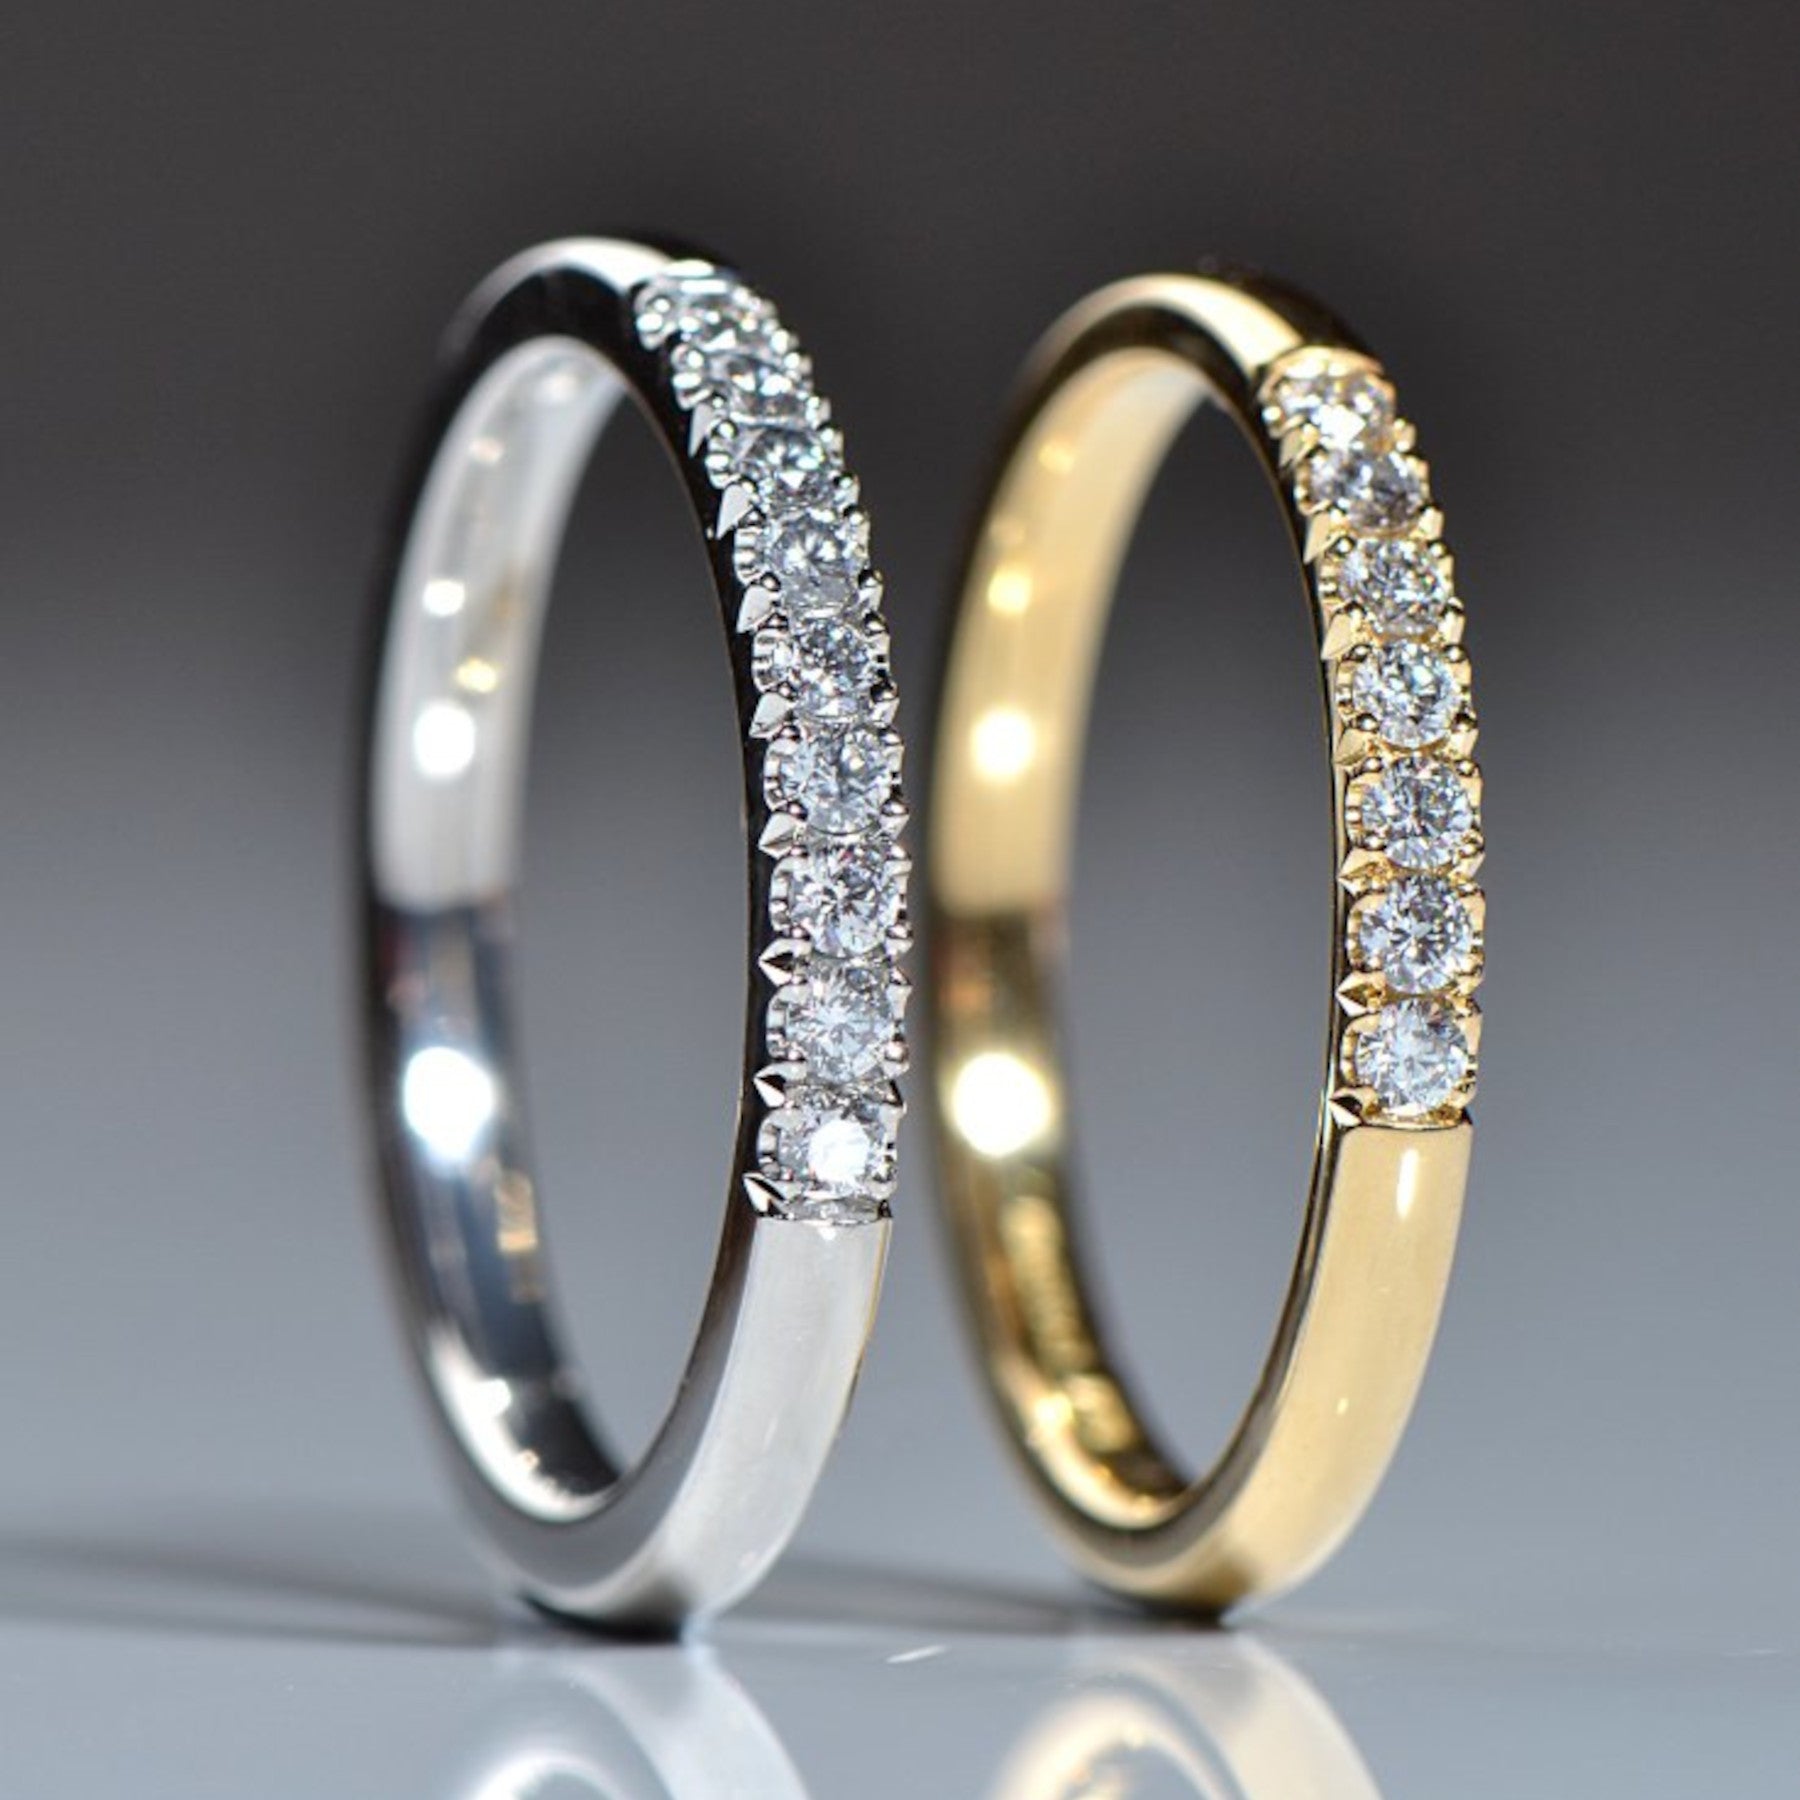 diamond castle set eternity rings in platinum and yellow gold